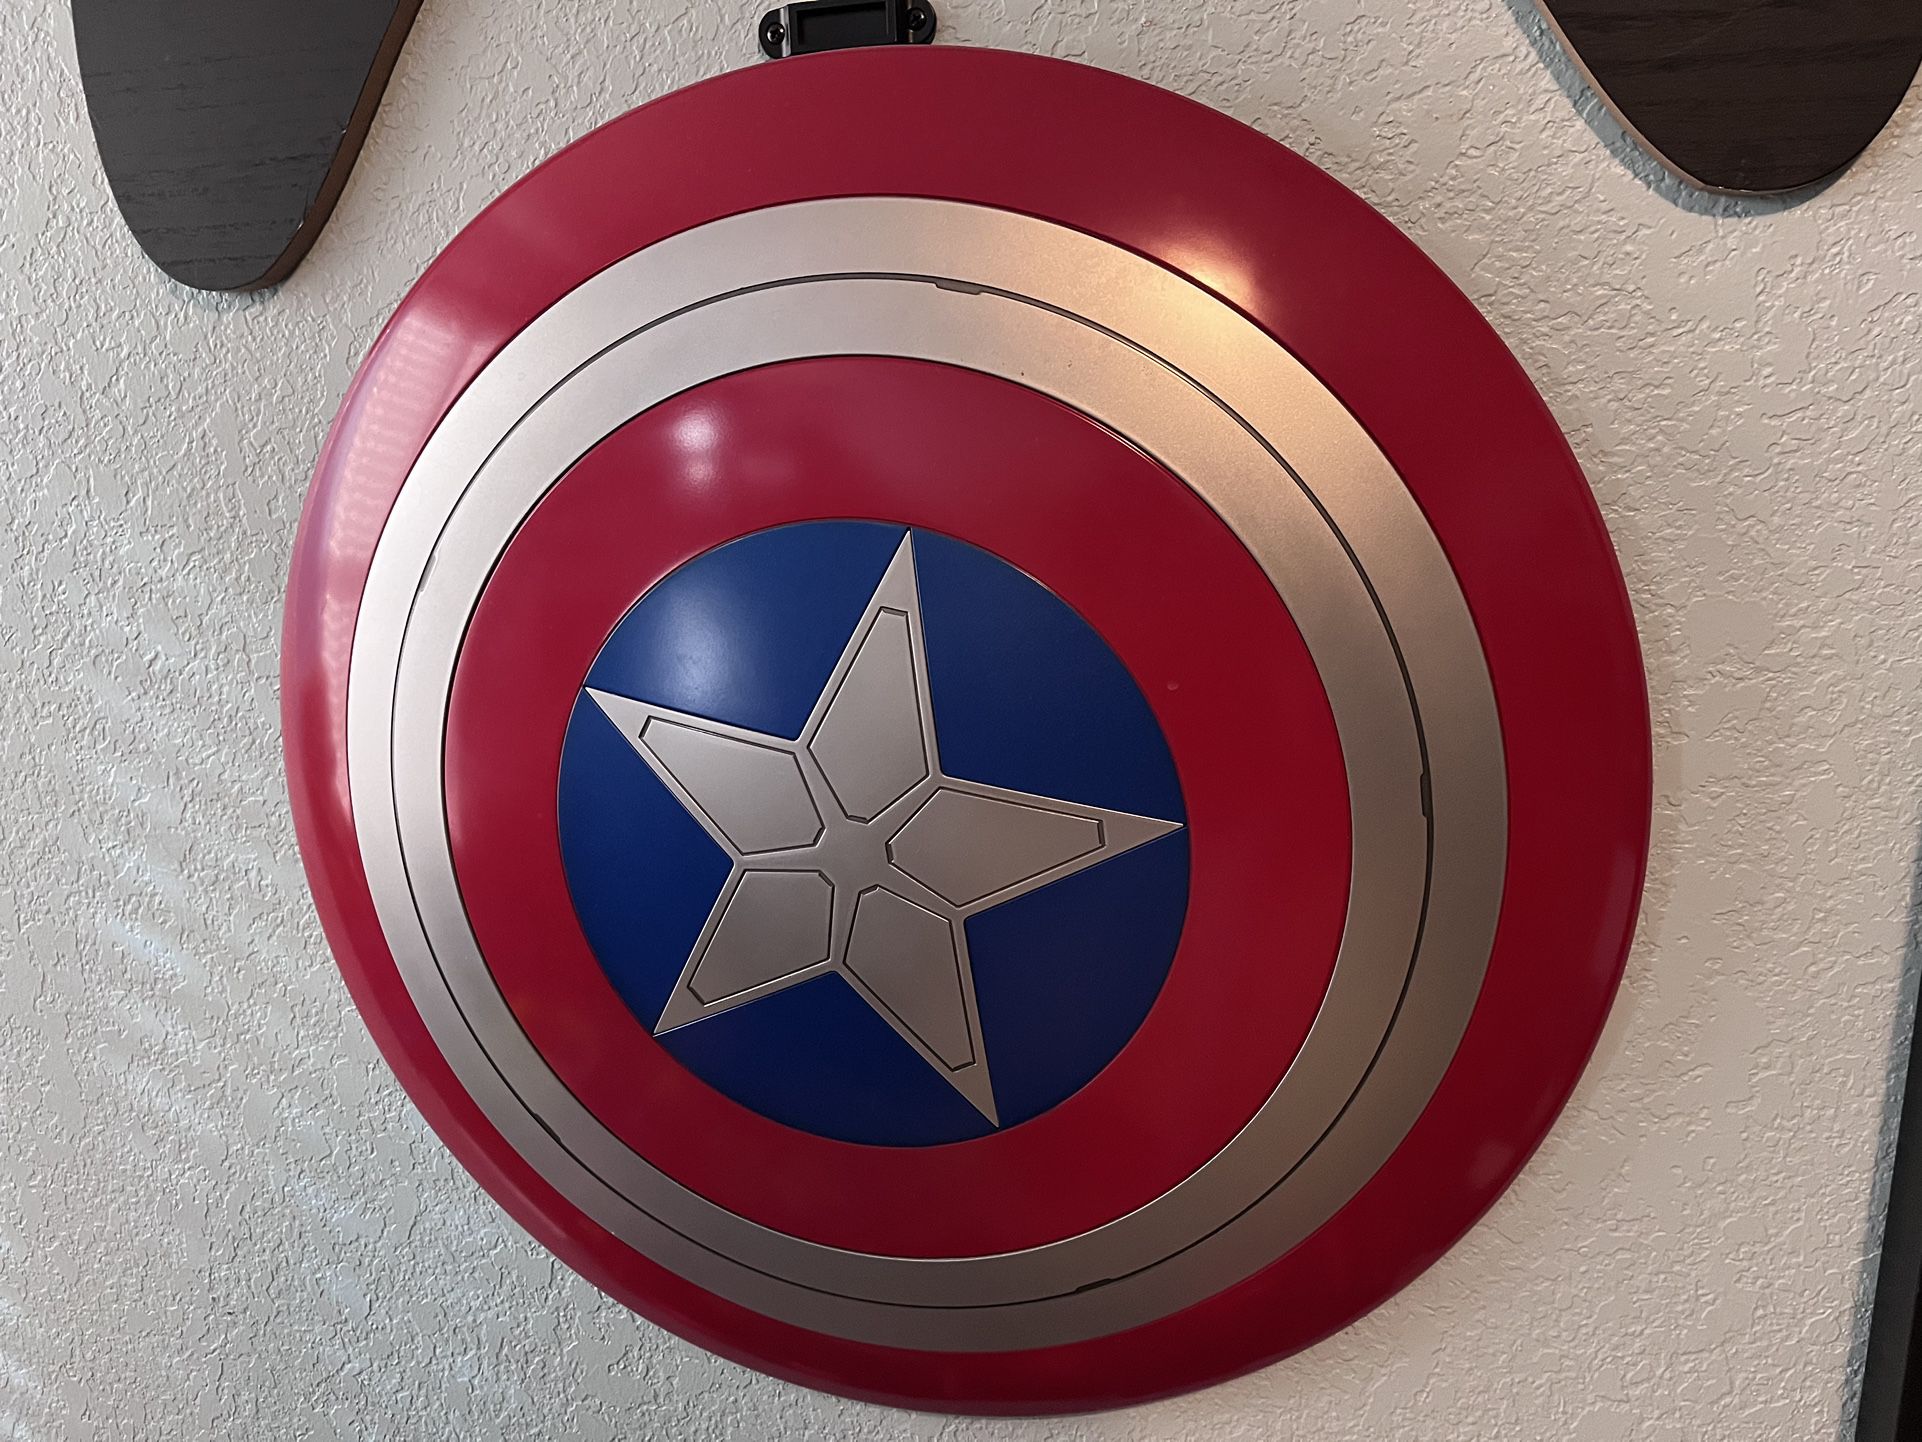 Captain America Shield (Adult Sized)